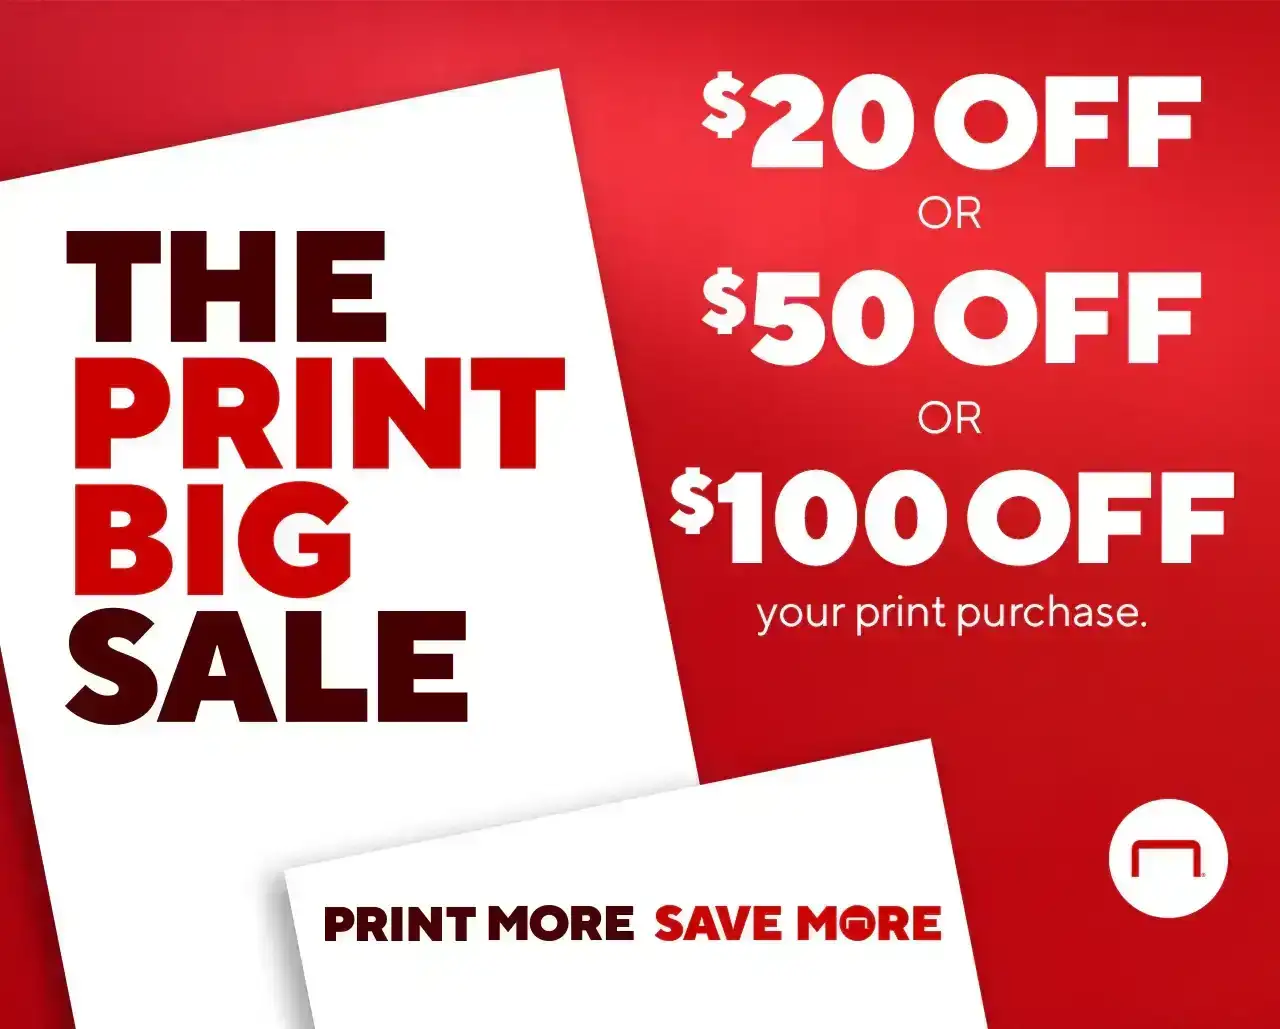 THE PRINT BIG SALEPRINT MORE SAVE MORE\\$20 OFFor\\$50 OFFor\\$100 OFF